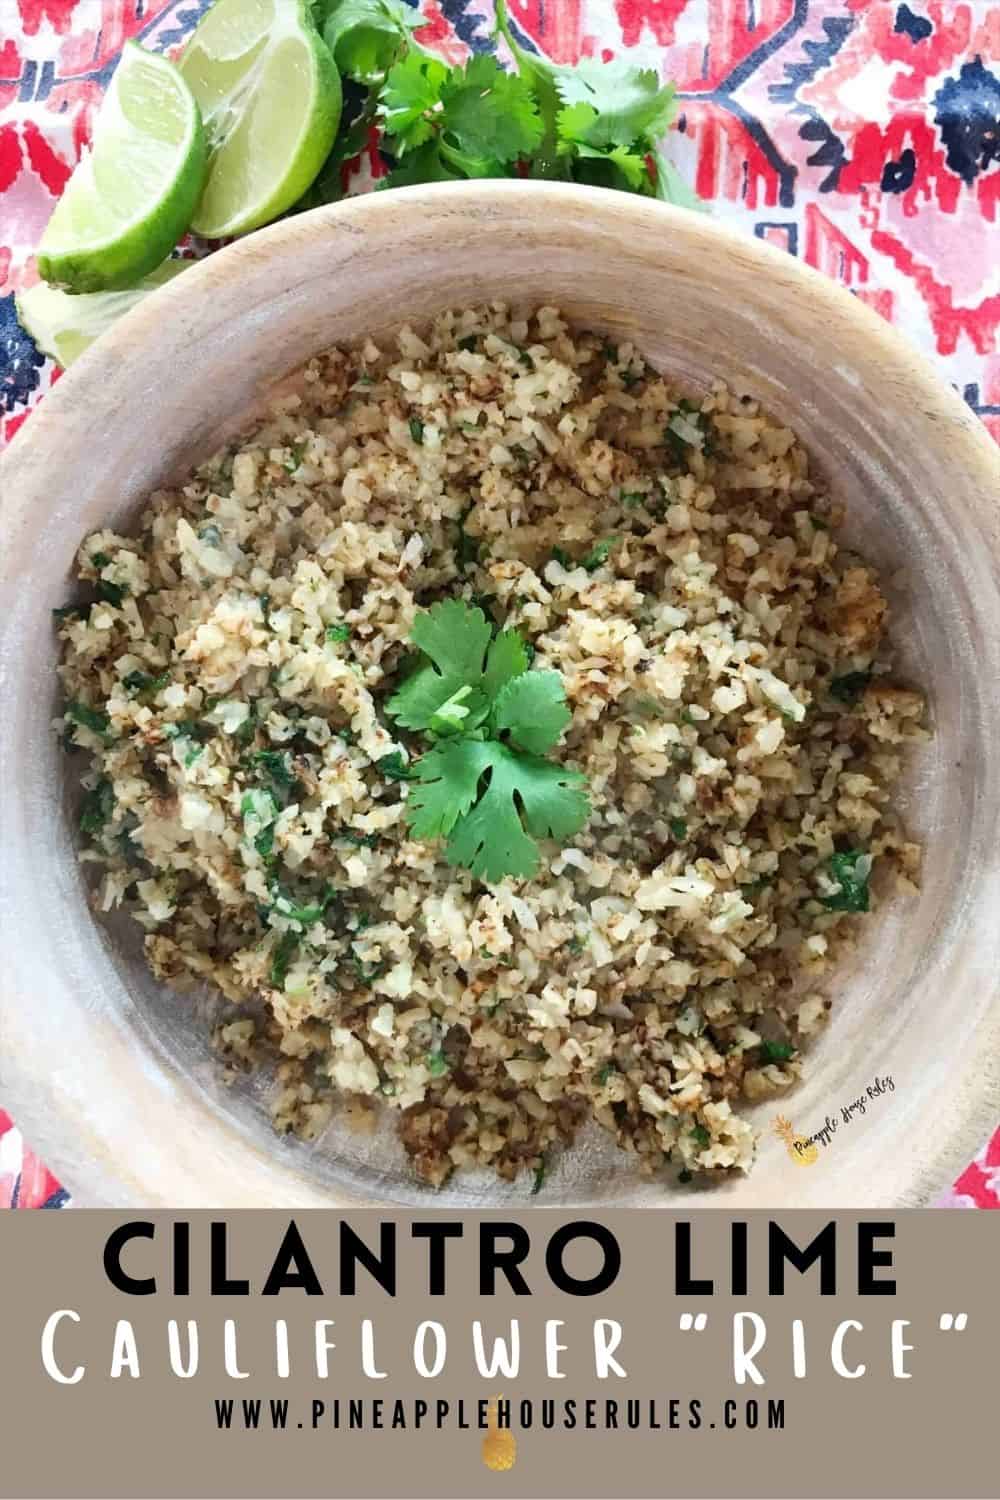 Cilantro Lime Cauliflower Rice is a healthy, low carb side dish that pairs perfectly with Mexican and Southwestern cuisine. Cilantro Lime Cauliflower Rice | Cauliflower Rice Recipes | Cauliflower Rice | Cauliflower Rice Recipes Healthy | Cauliflower Rice Recipes Easy | Mexican Rice | Low Carb Recipes | Low Carb Meals | Side Dishes | Side Dish Ideas for Dinner | Side Dish Recipes | Side Dishes for Mexican Food | Side Dishes for Mexican Food Dinner | Side Dish Recipes Healthy | Healthy Recipes